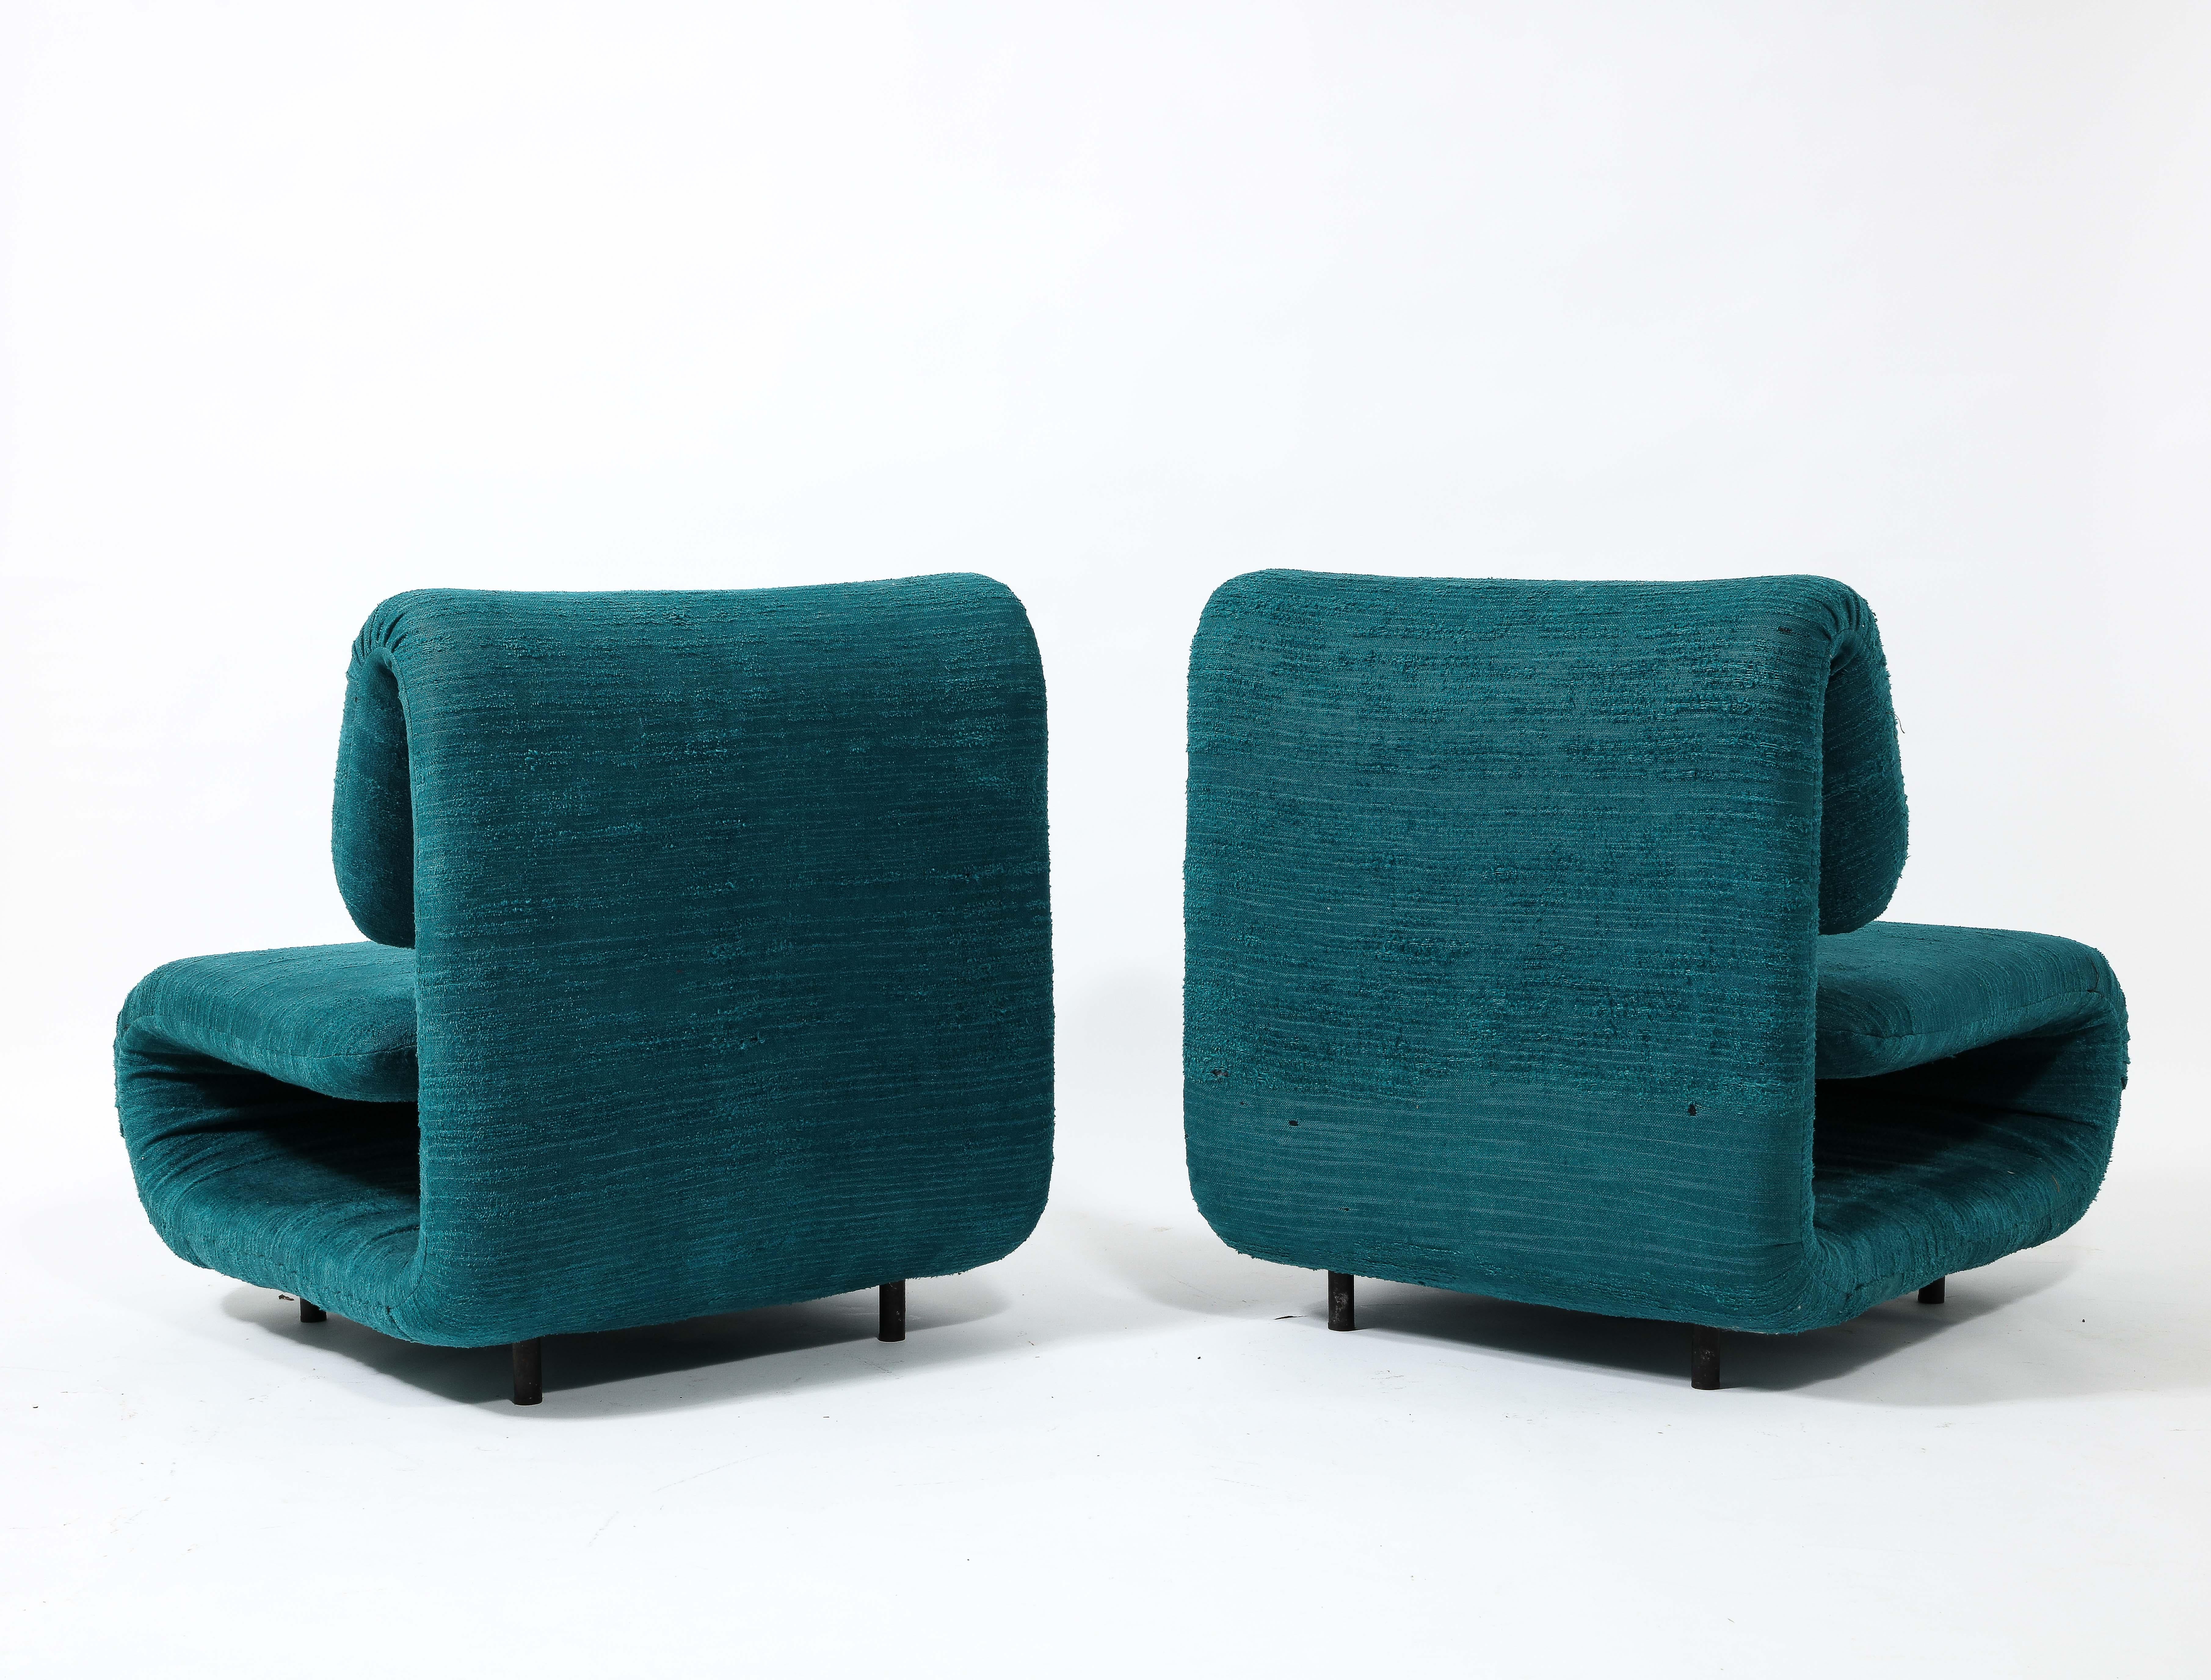 Etienne-Henri Martin Pair of 1500 Slipper Lounge Chairs in Teal, France 1960's For Sale 2